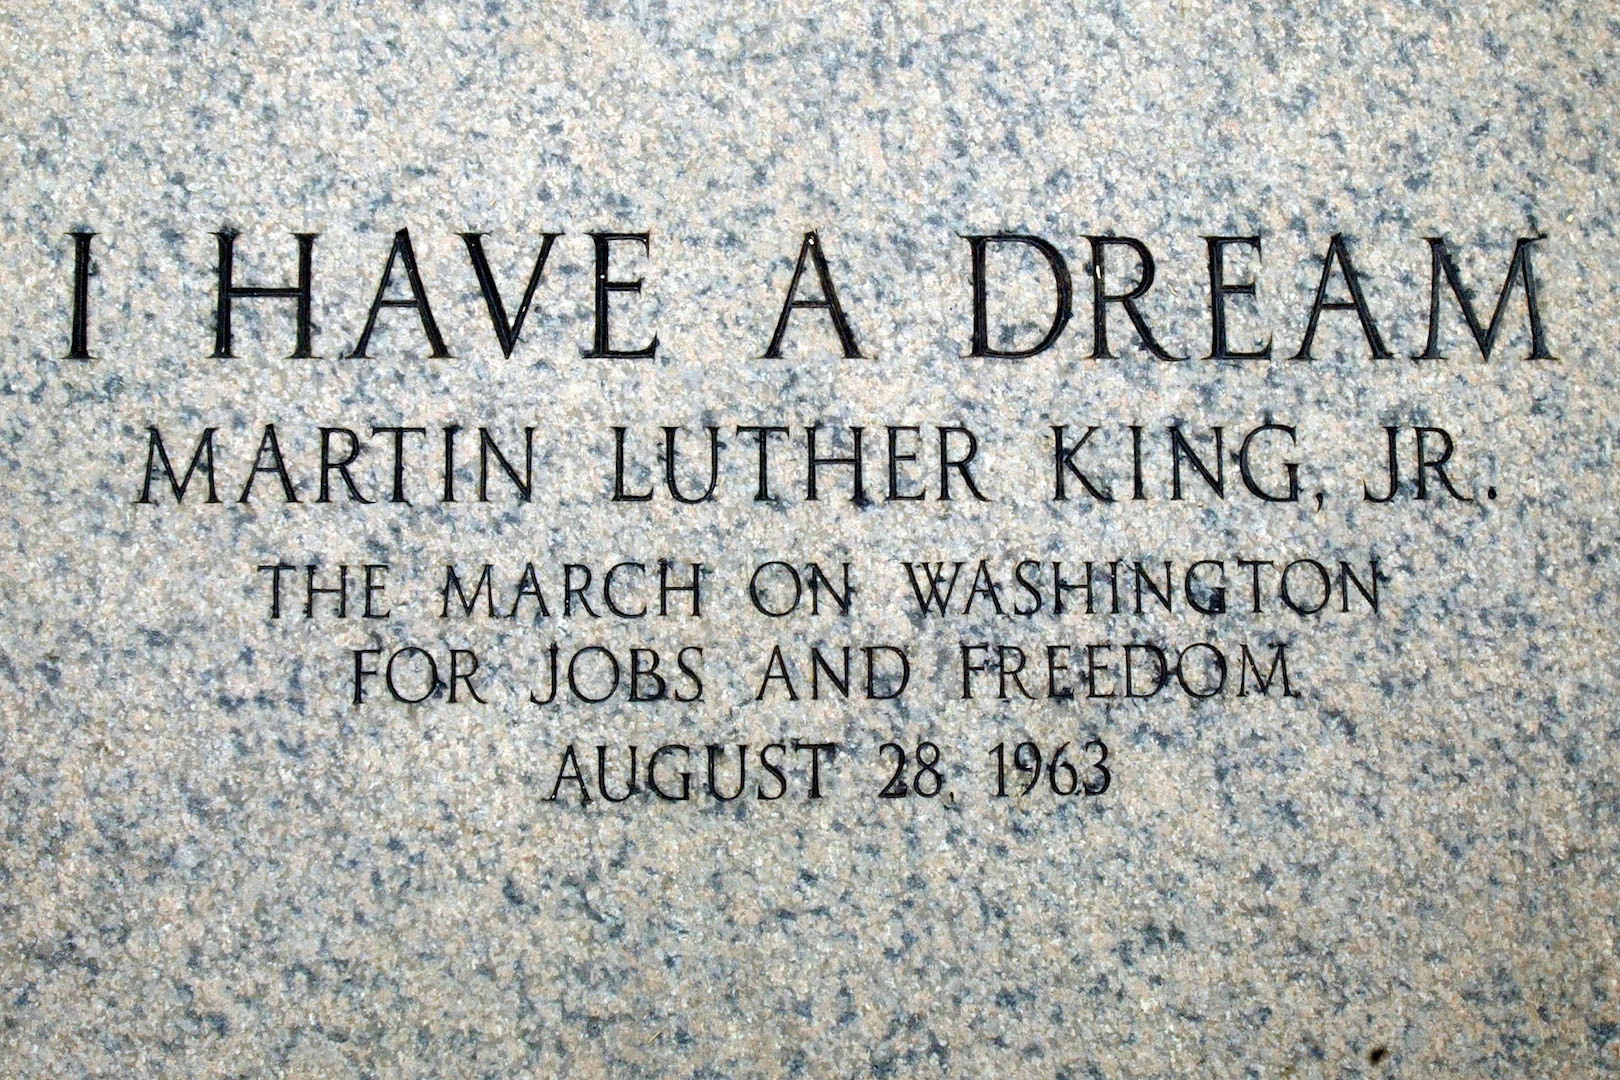 PIN'S EDITION SAGGAY I HAVE A DREAM MARTIN LUTHER KING 